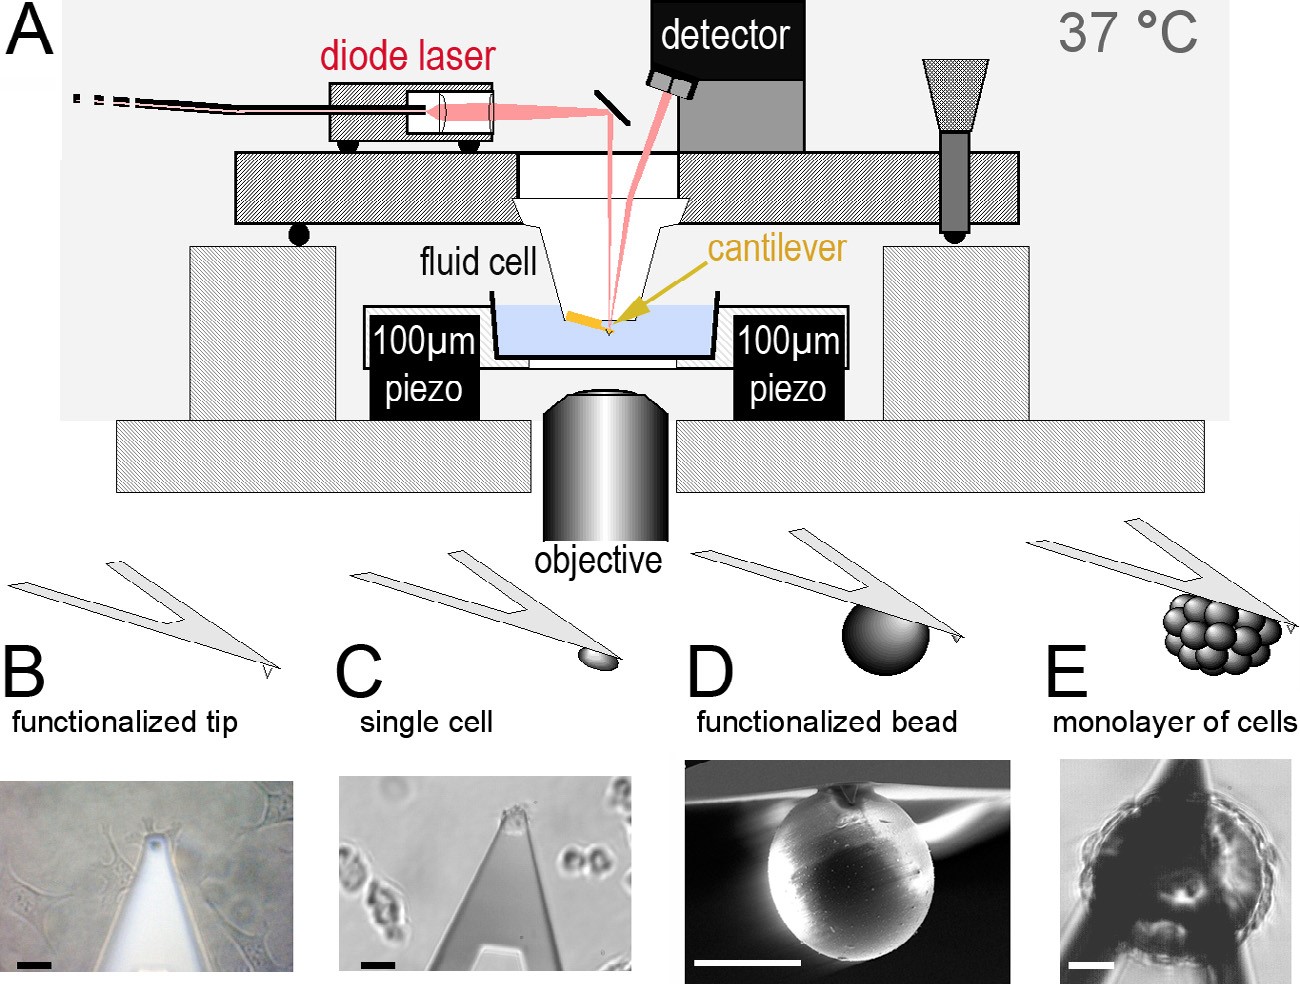 Experimental setup of AFM-based SCFS and of functionalized cantilevers. (A) To detect the deflection (force) of a functionalized cantilever (see B) a laser is reflected from the cantilever onto a position sensitive photodiode. To bring the cantilever probe into contact with a target cell or substrate, which is present on a cell culture dish, a piezoelectric scanner vertically moves the cell culture dish by at least 100 lm. The setup is mounted onto a light microscope (i.e., phase contrast, DIC, fluorescence, confocal microscope) to optically characterize the cell. The entire setup is preferably placed into a temperature controlled (37 C) and noise isolated chamber. (B) Light microscopy image of endothelial cells probed by a functionalized AFM tip. (C) Single dictyostelium cell attached to a tipless cantilever. The dictyostelium ‘probe’ cell on the cantilever is placed above other dictyostelium cells plated on a Petri dish. (D) Electron microscopy image of an AFM cantilever that has been functionalized with a micrometer sized bead. The bead can be functionalized with chemical groups or cells to characterize adhesion to a target cell. (E) Monolayer of bone cells cultivated on a bead. Scale bars, 20 µm. Figure taken from J. Friedrichset al. Methods (2013) 60, 169–178.